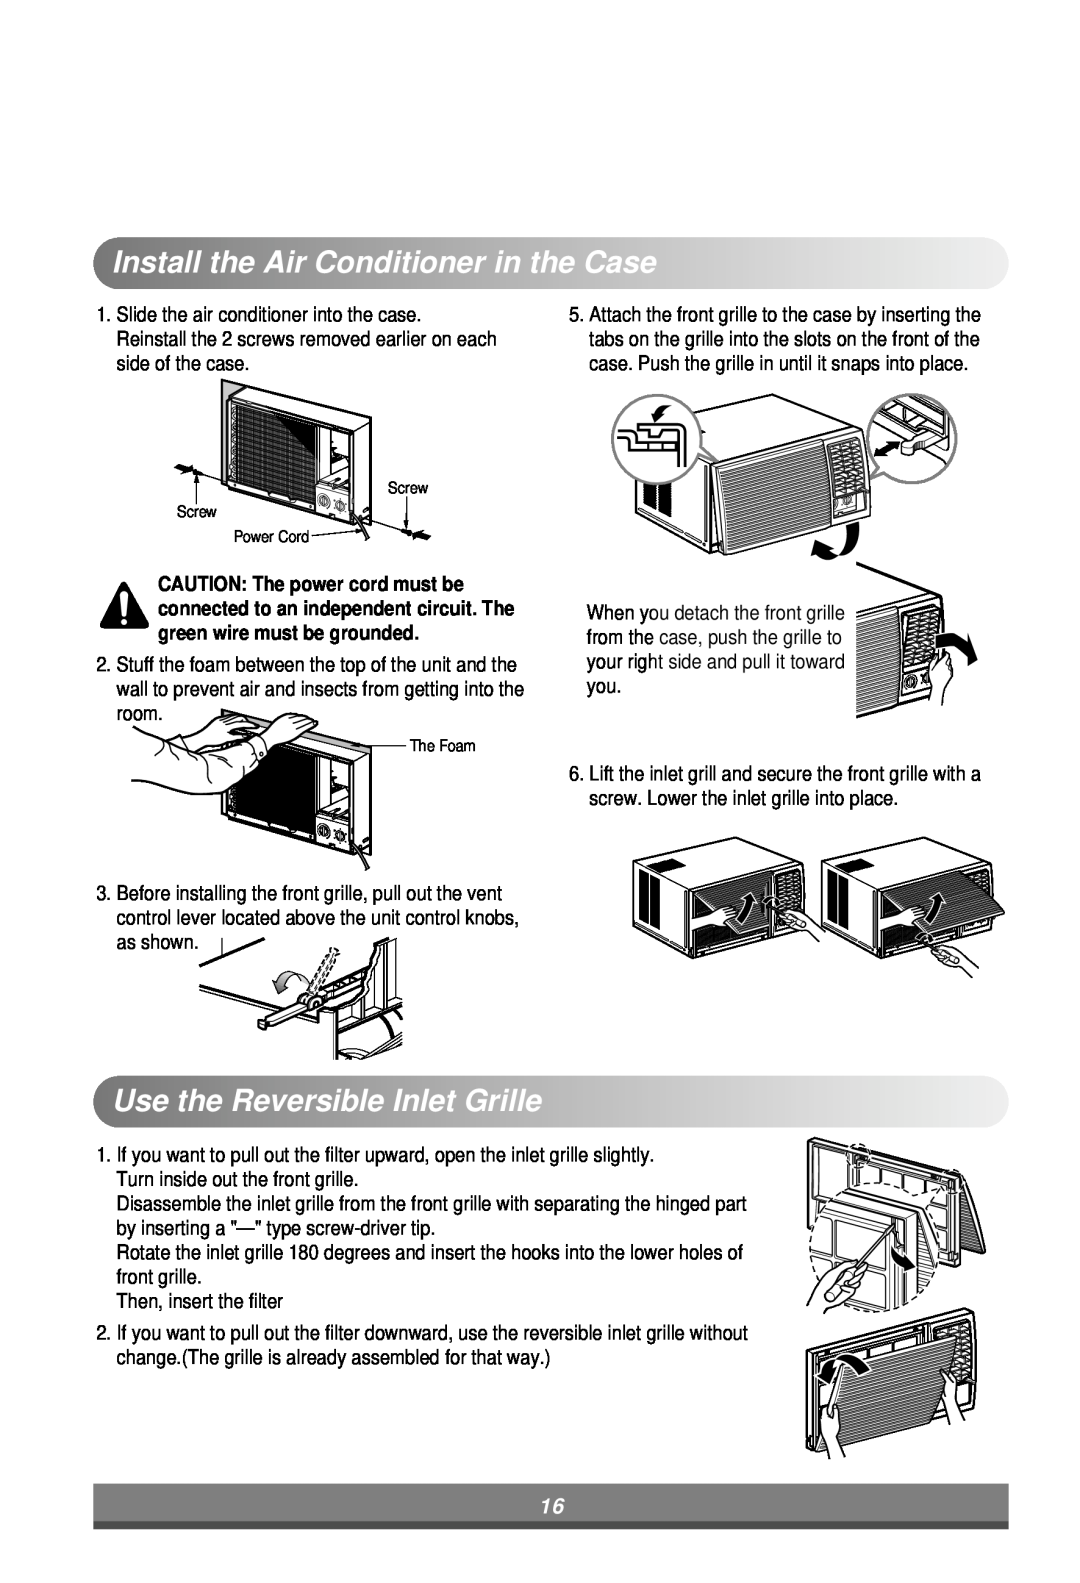 Minolta W091CA TSG0 owner manual InstalltheAirConditionerintheCase, Use theReversibleInletGrille 